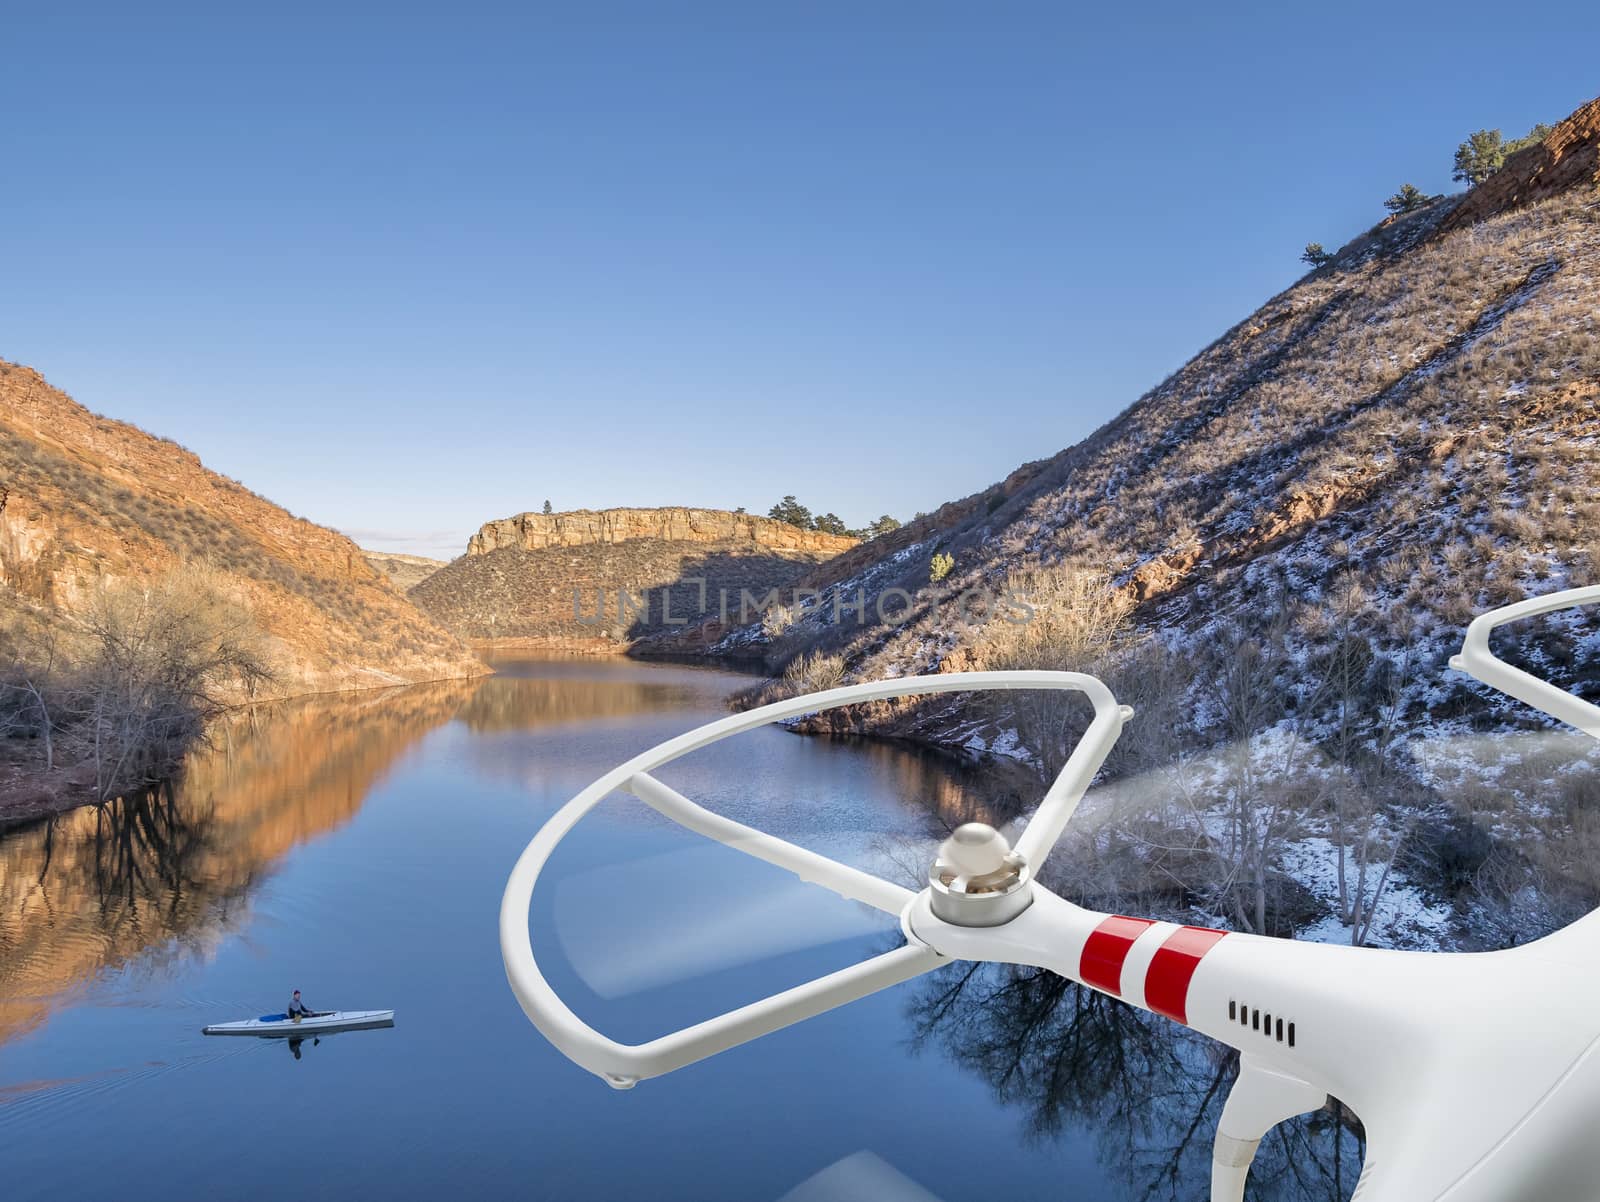 quadcopter drone flying over lake with a canoe - Horsetooth Reservoir near Fort Collins, Colorado